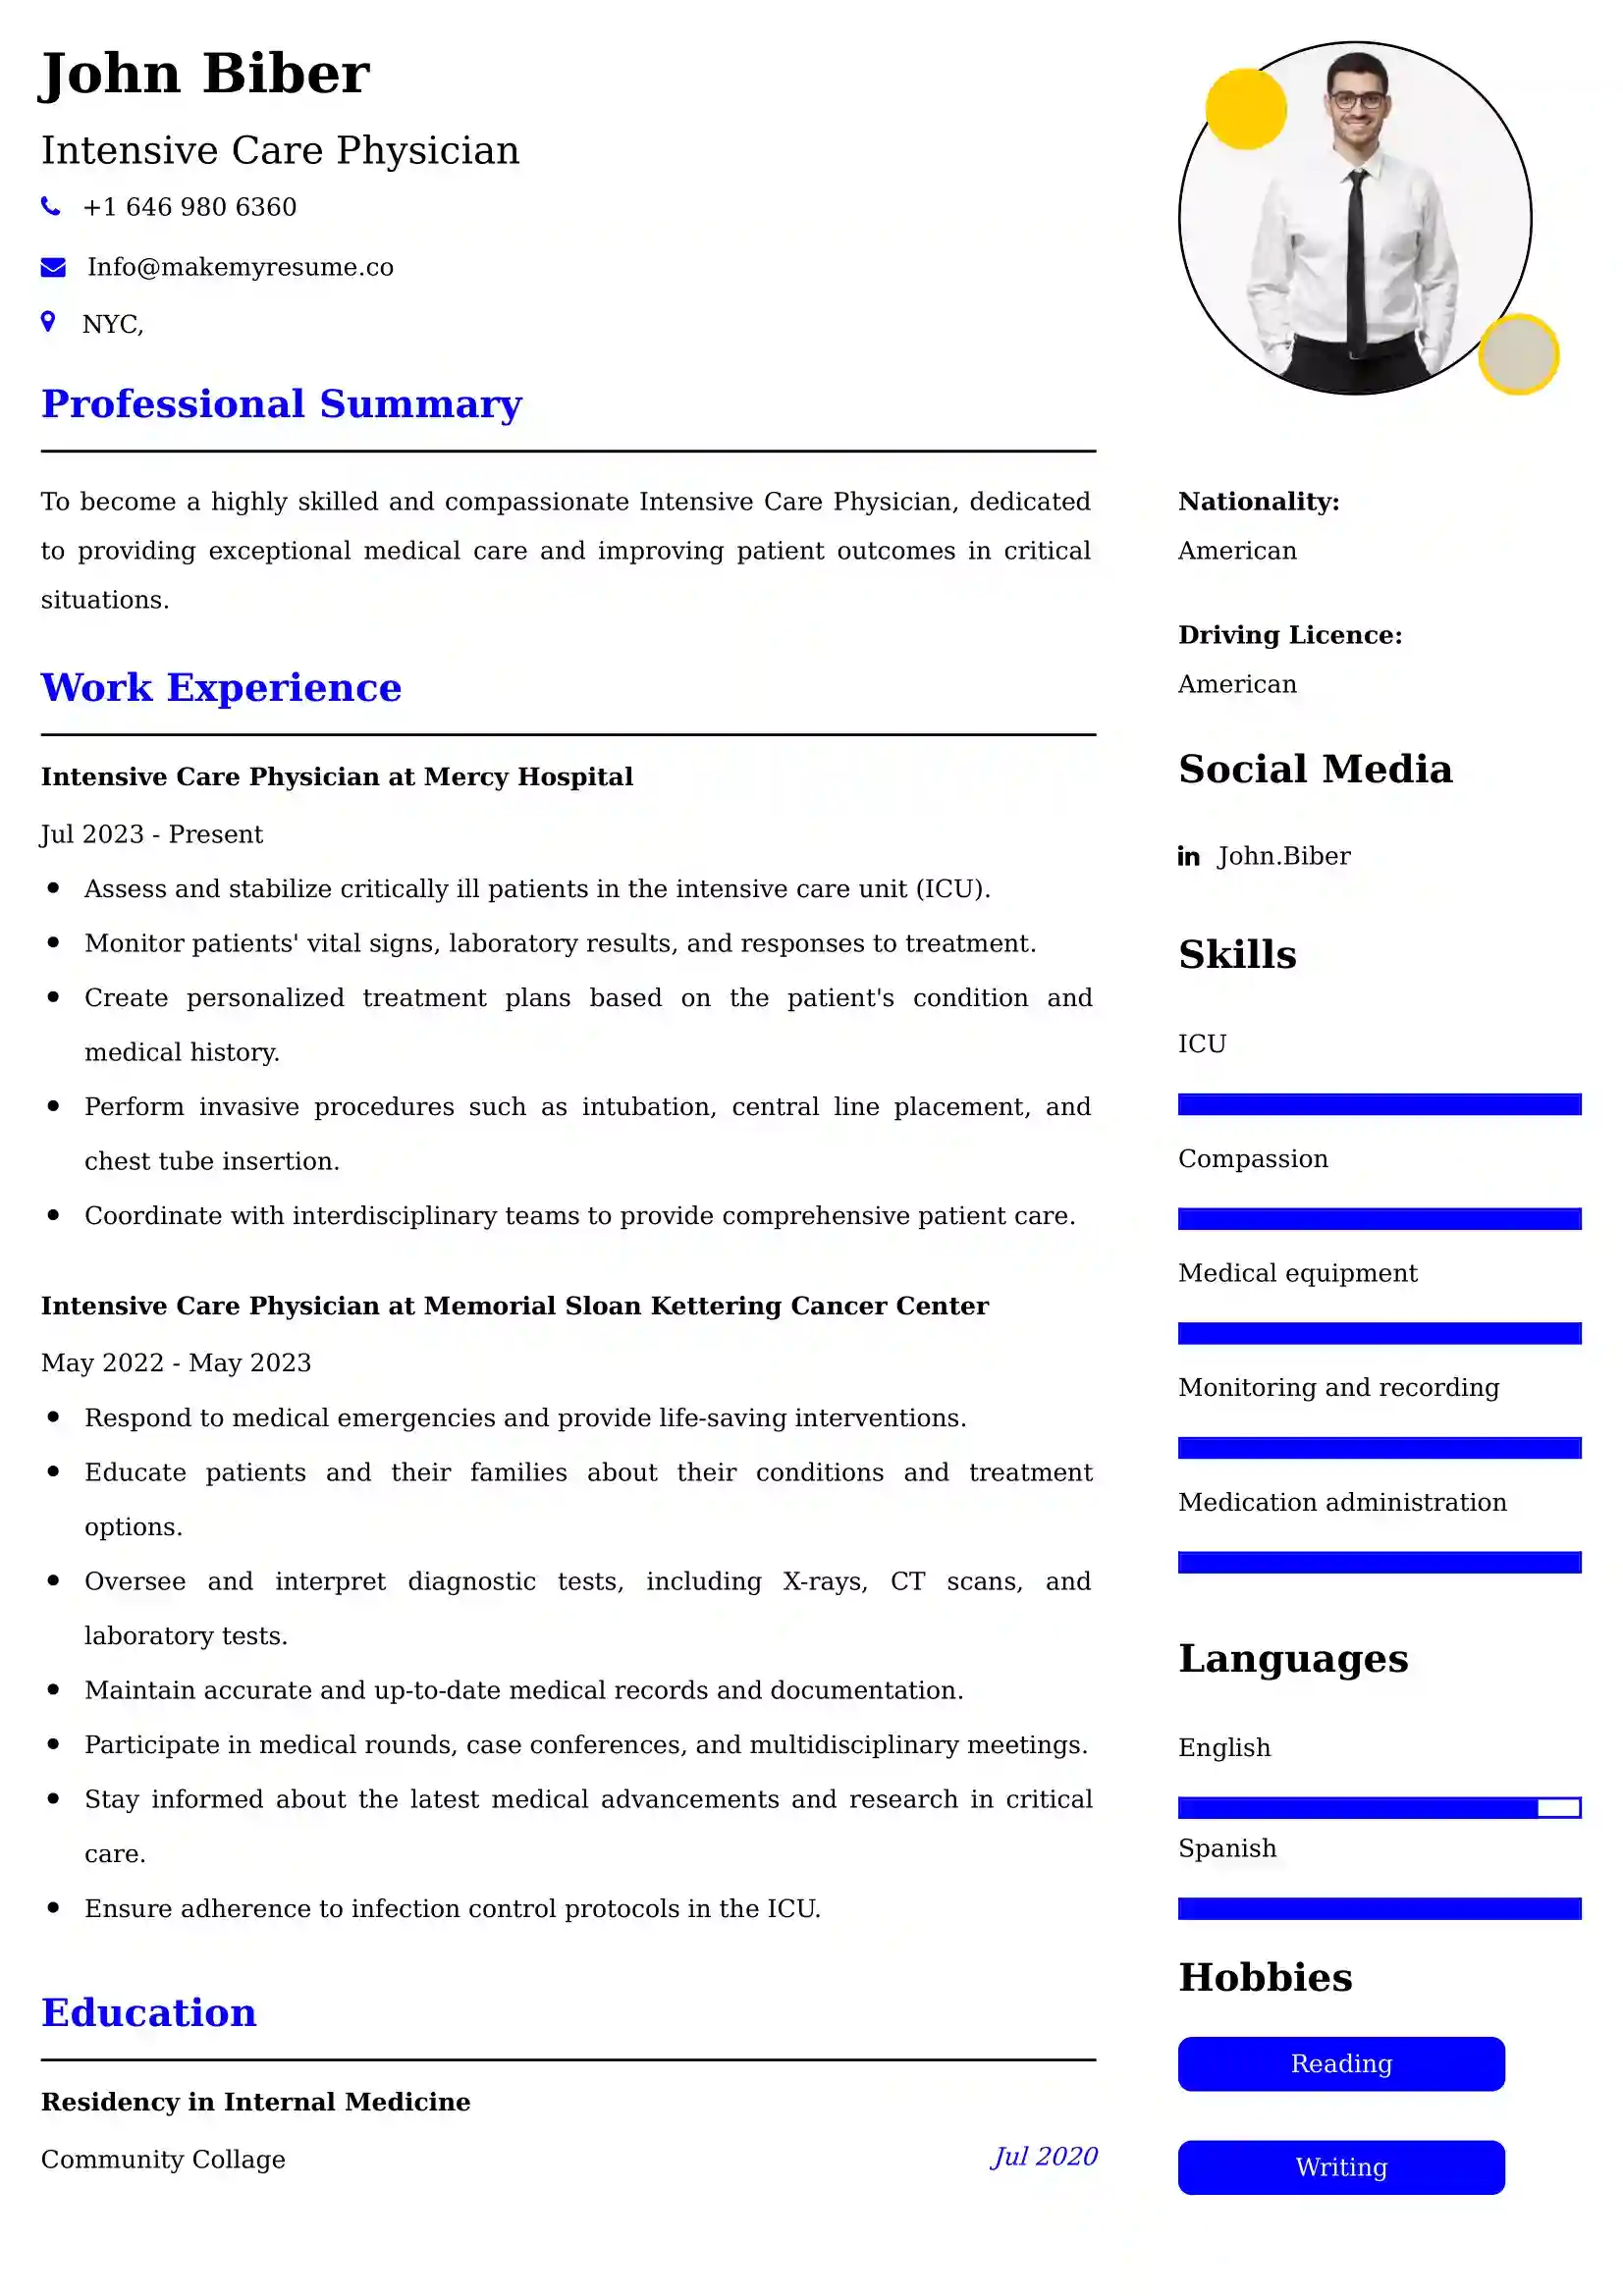 Intensive Care Physician Resume Examples - UK Format, Latest Template.